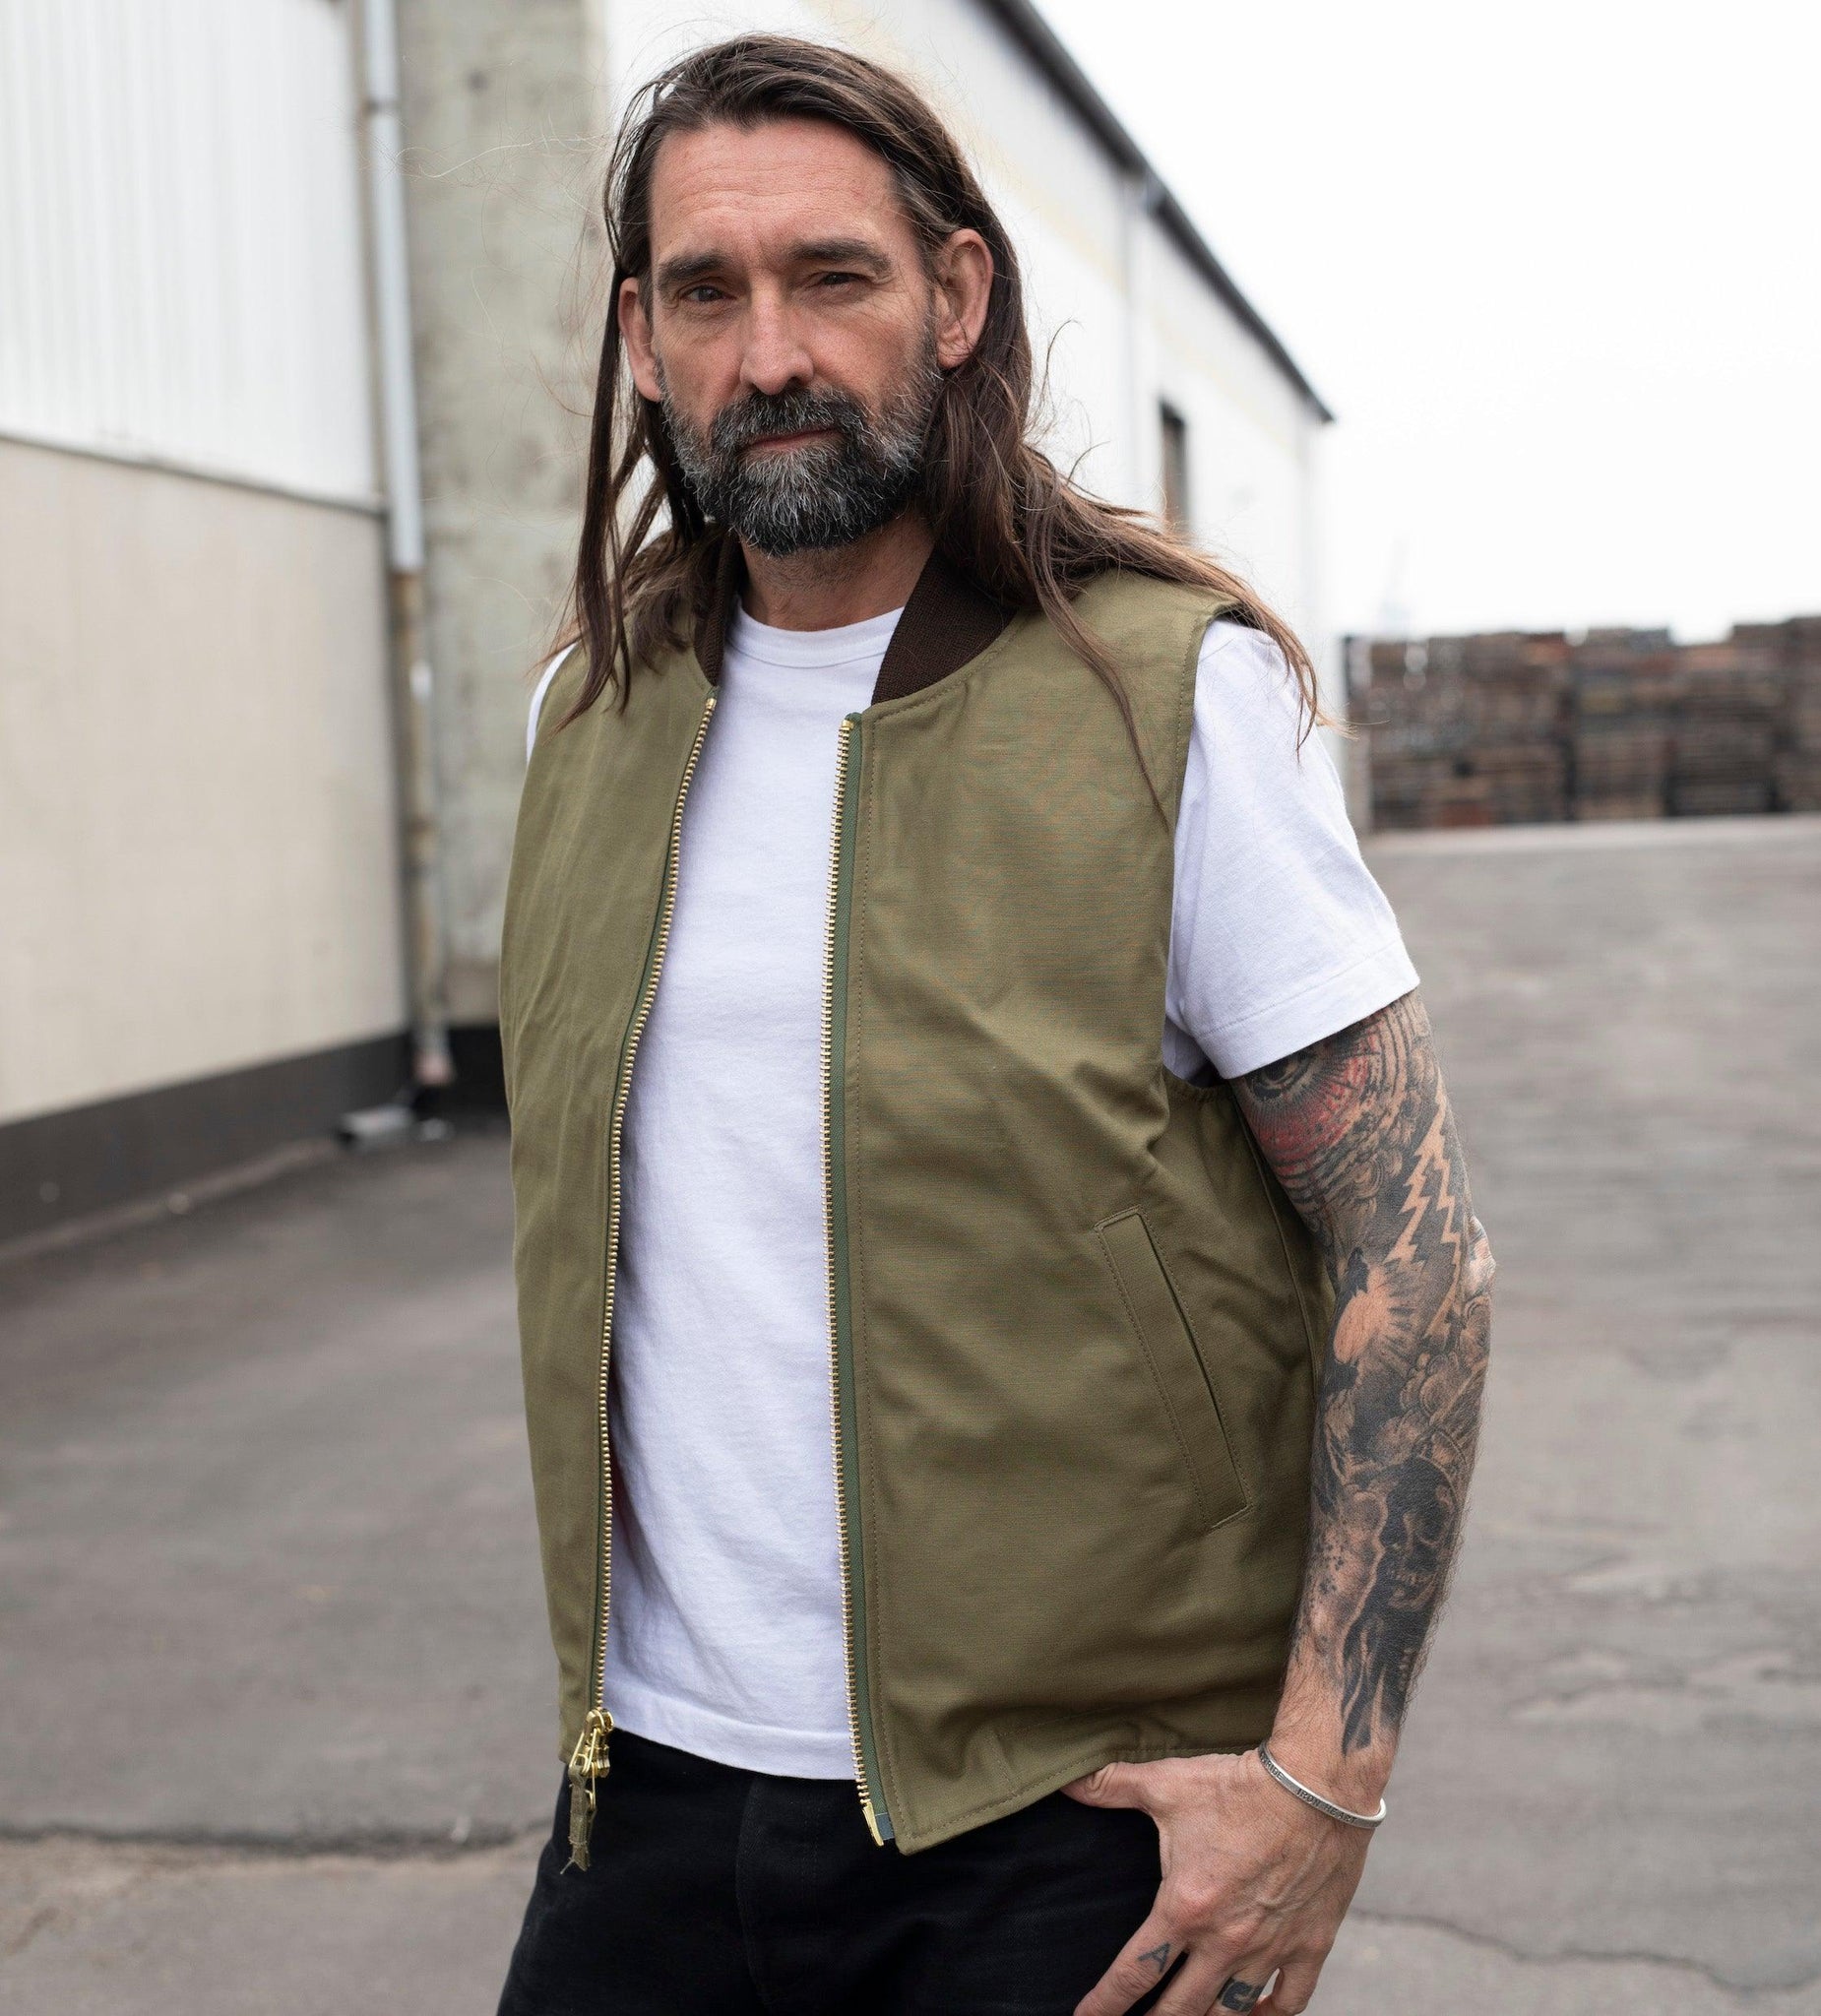 Image showing the DE-JV0093-OLV - Flight Vest Sateen - Olive which is a Vests described by the following info Dehen 1920, Released, Tops, Vests and sold on the IRON HEART GERMANY online store